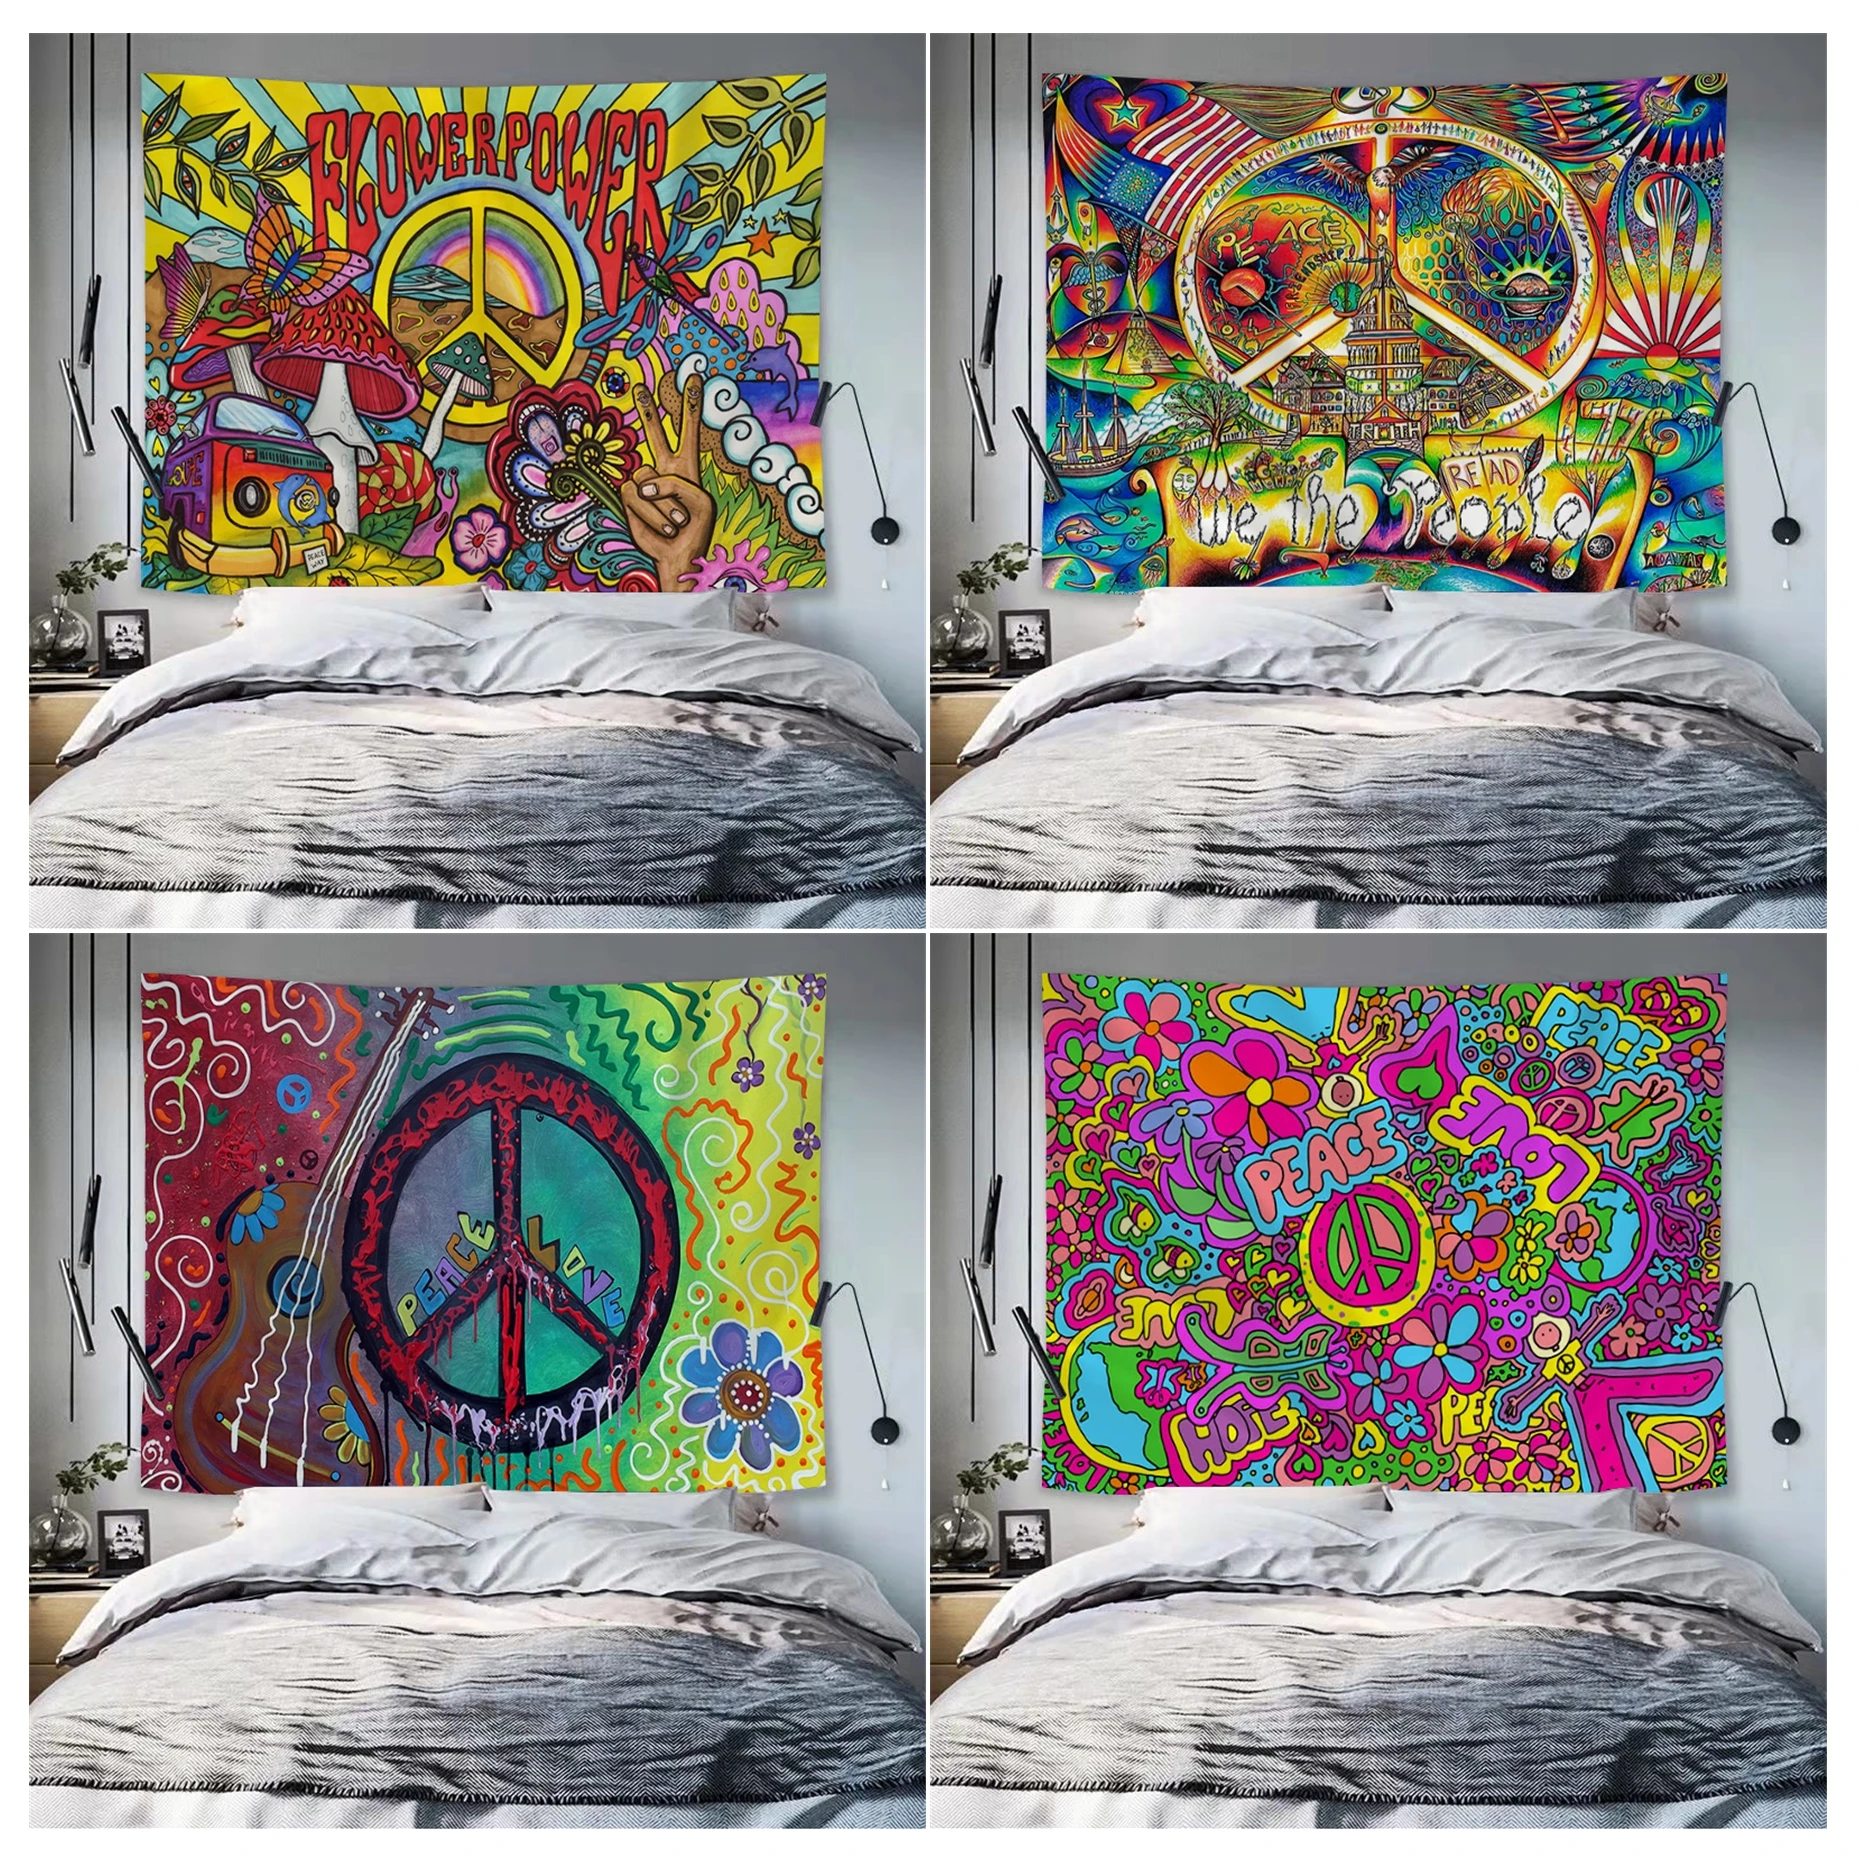 

Peace And Love Symbol Colorful Wall Tapestry Indian Buddha Wall Decoration Witchcraft Bohemian Hippie Wall Hanging Home Decor